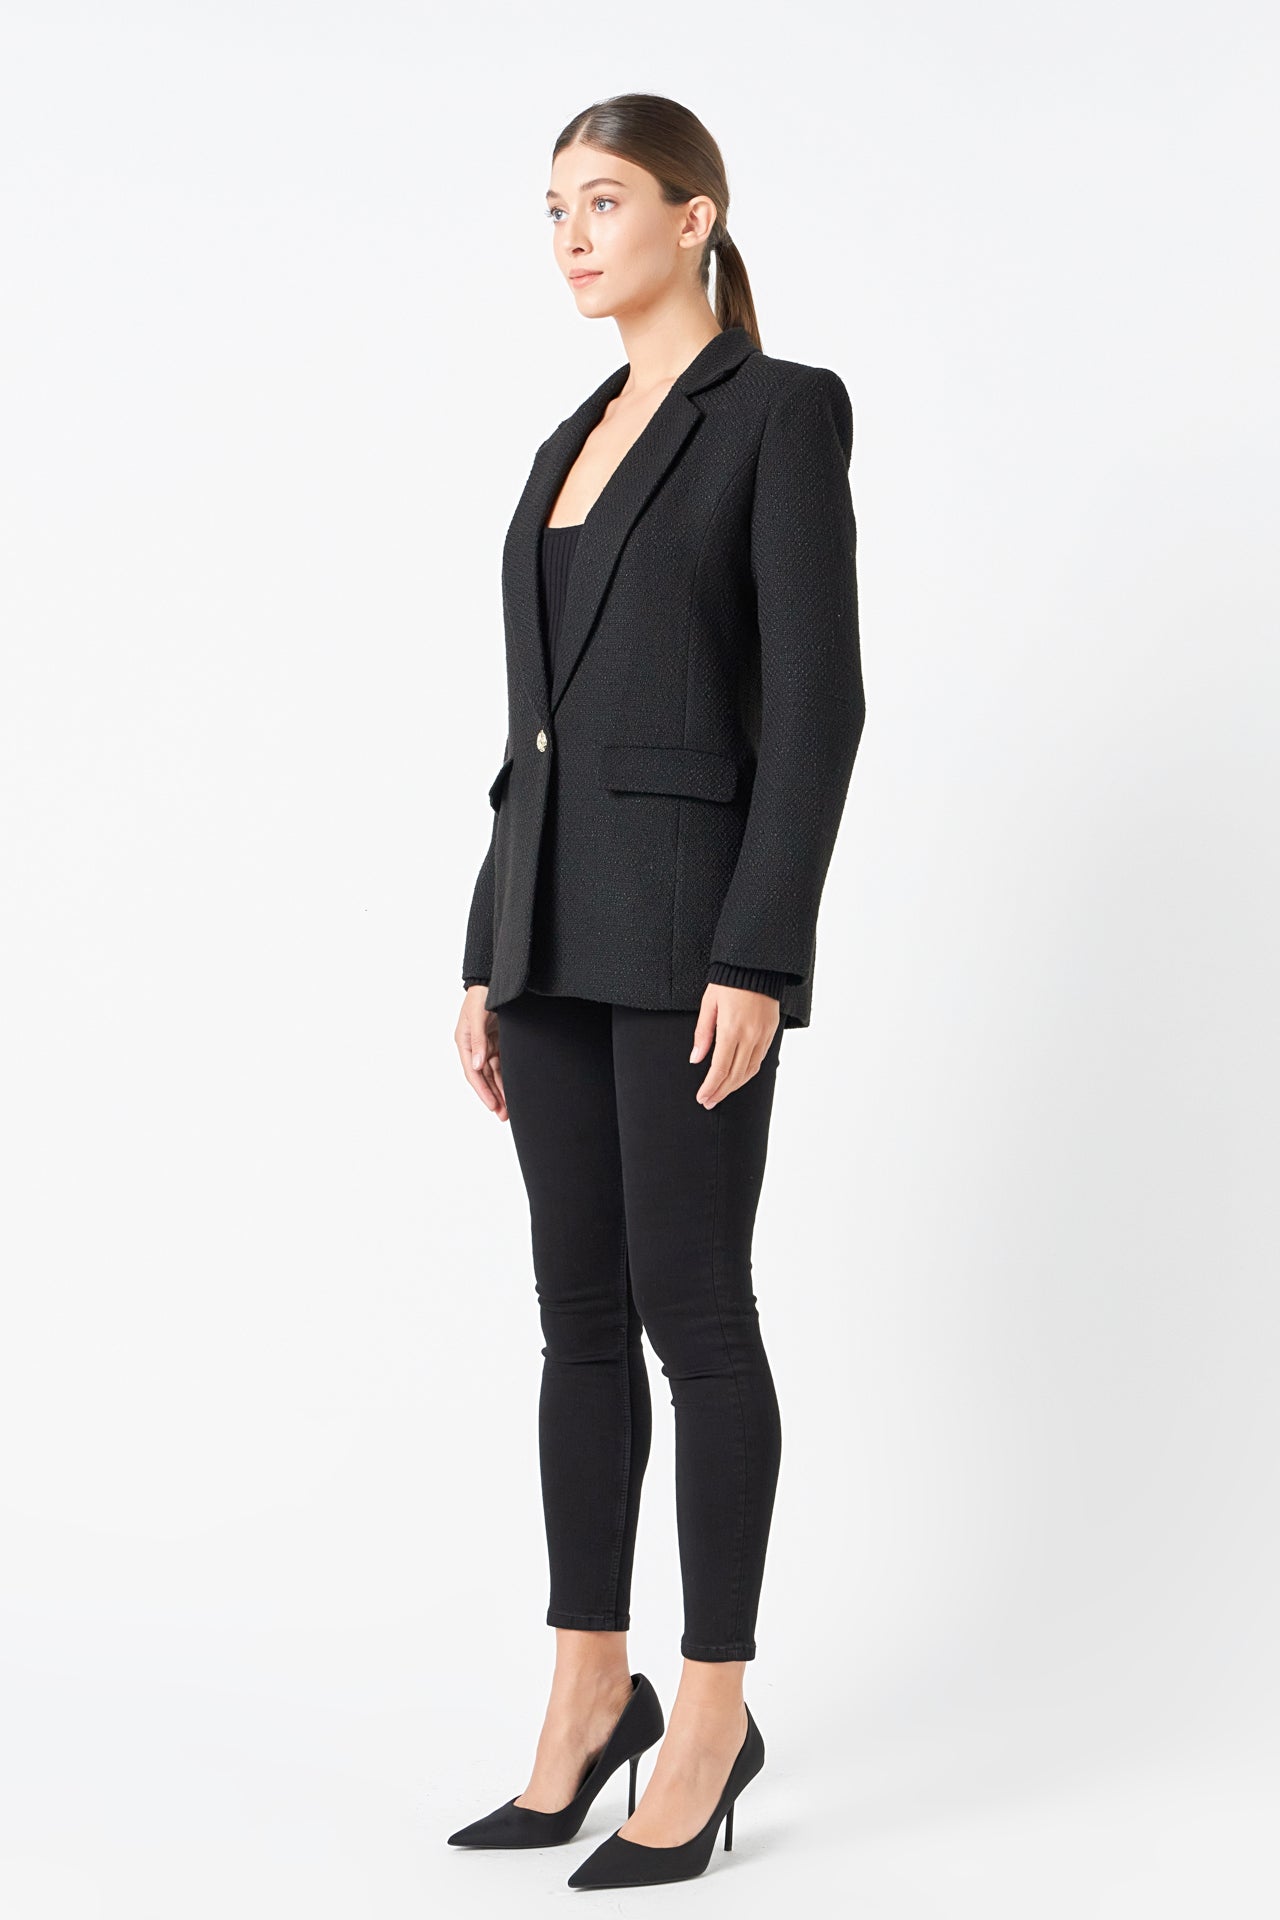 ENDLESS ROSE - Tweed Single Breast Blazer - BLAZERS available at Objectrare